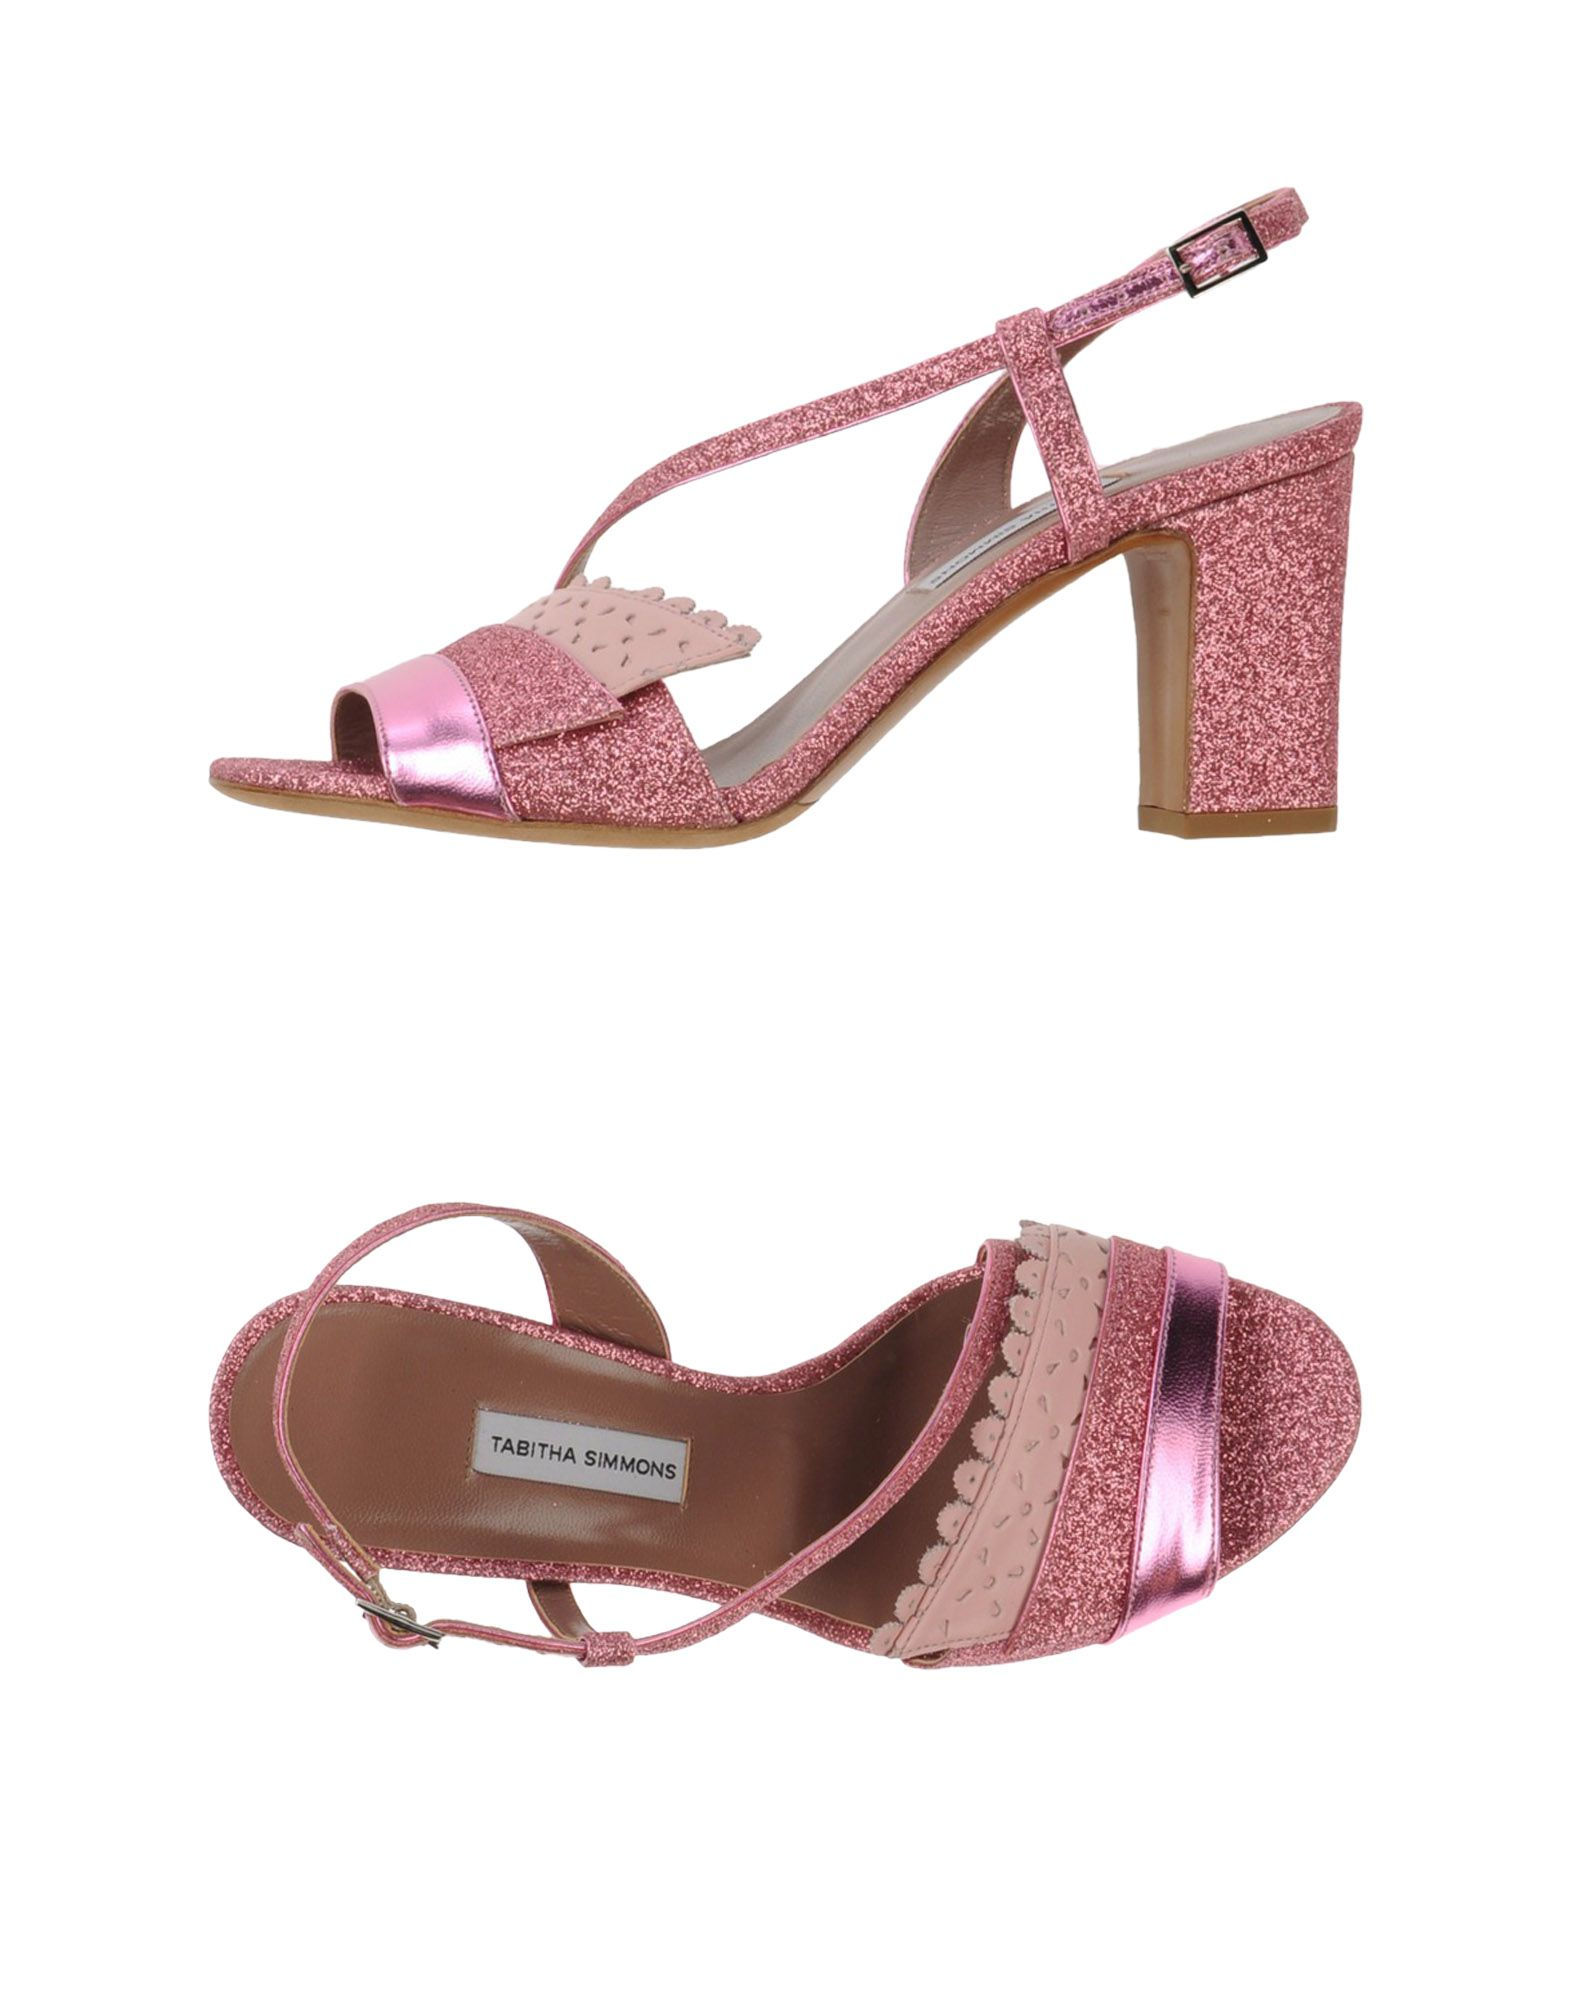 Tabitha simmons Sandals in Pink Lyst